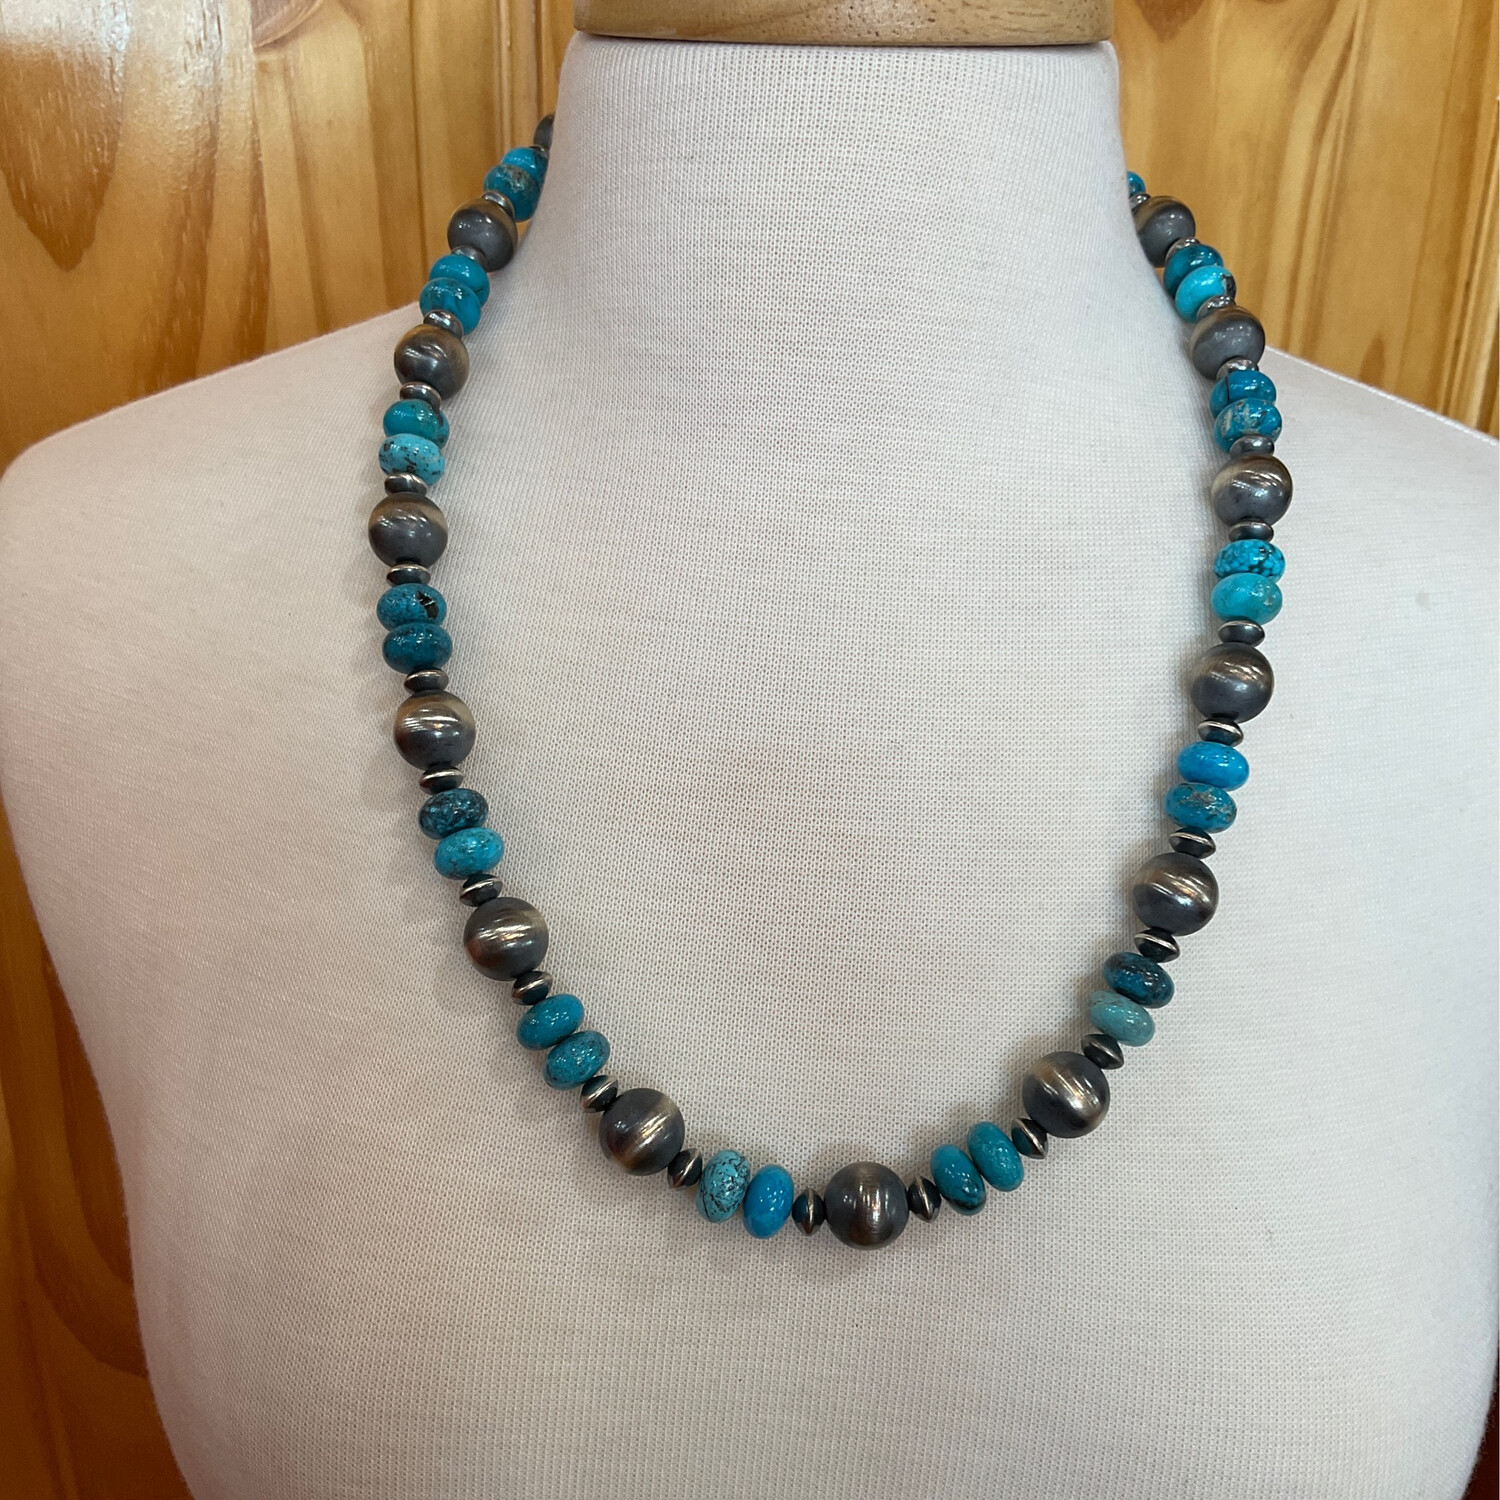 Silver Star Necklace 2 Tone Turquoise Stones & Silver Beads 